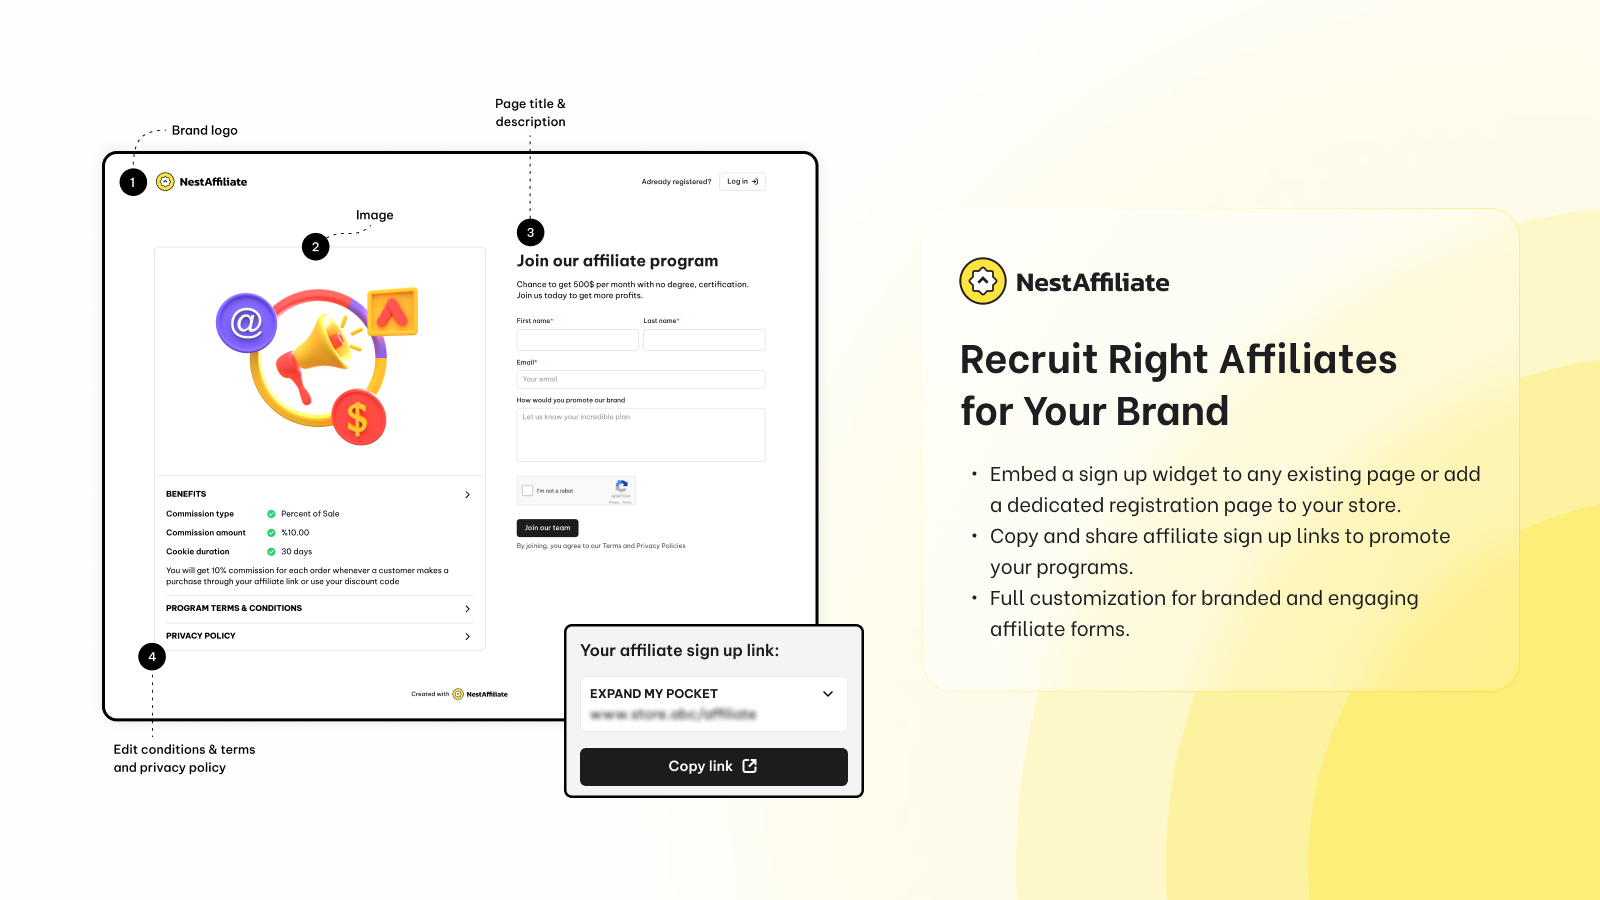 Recruit right affiliates for your brand